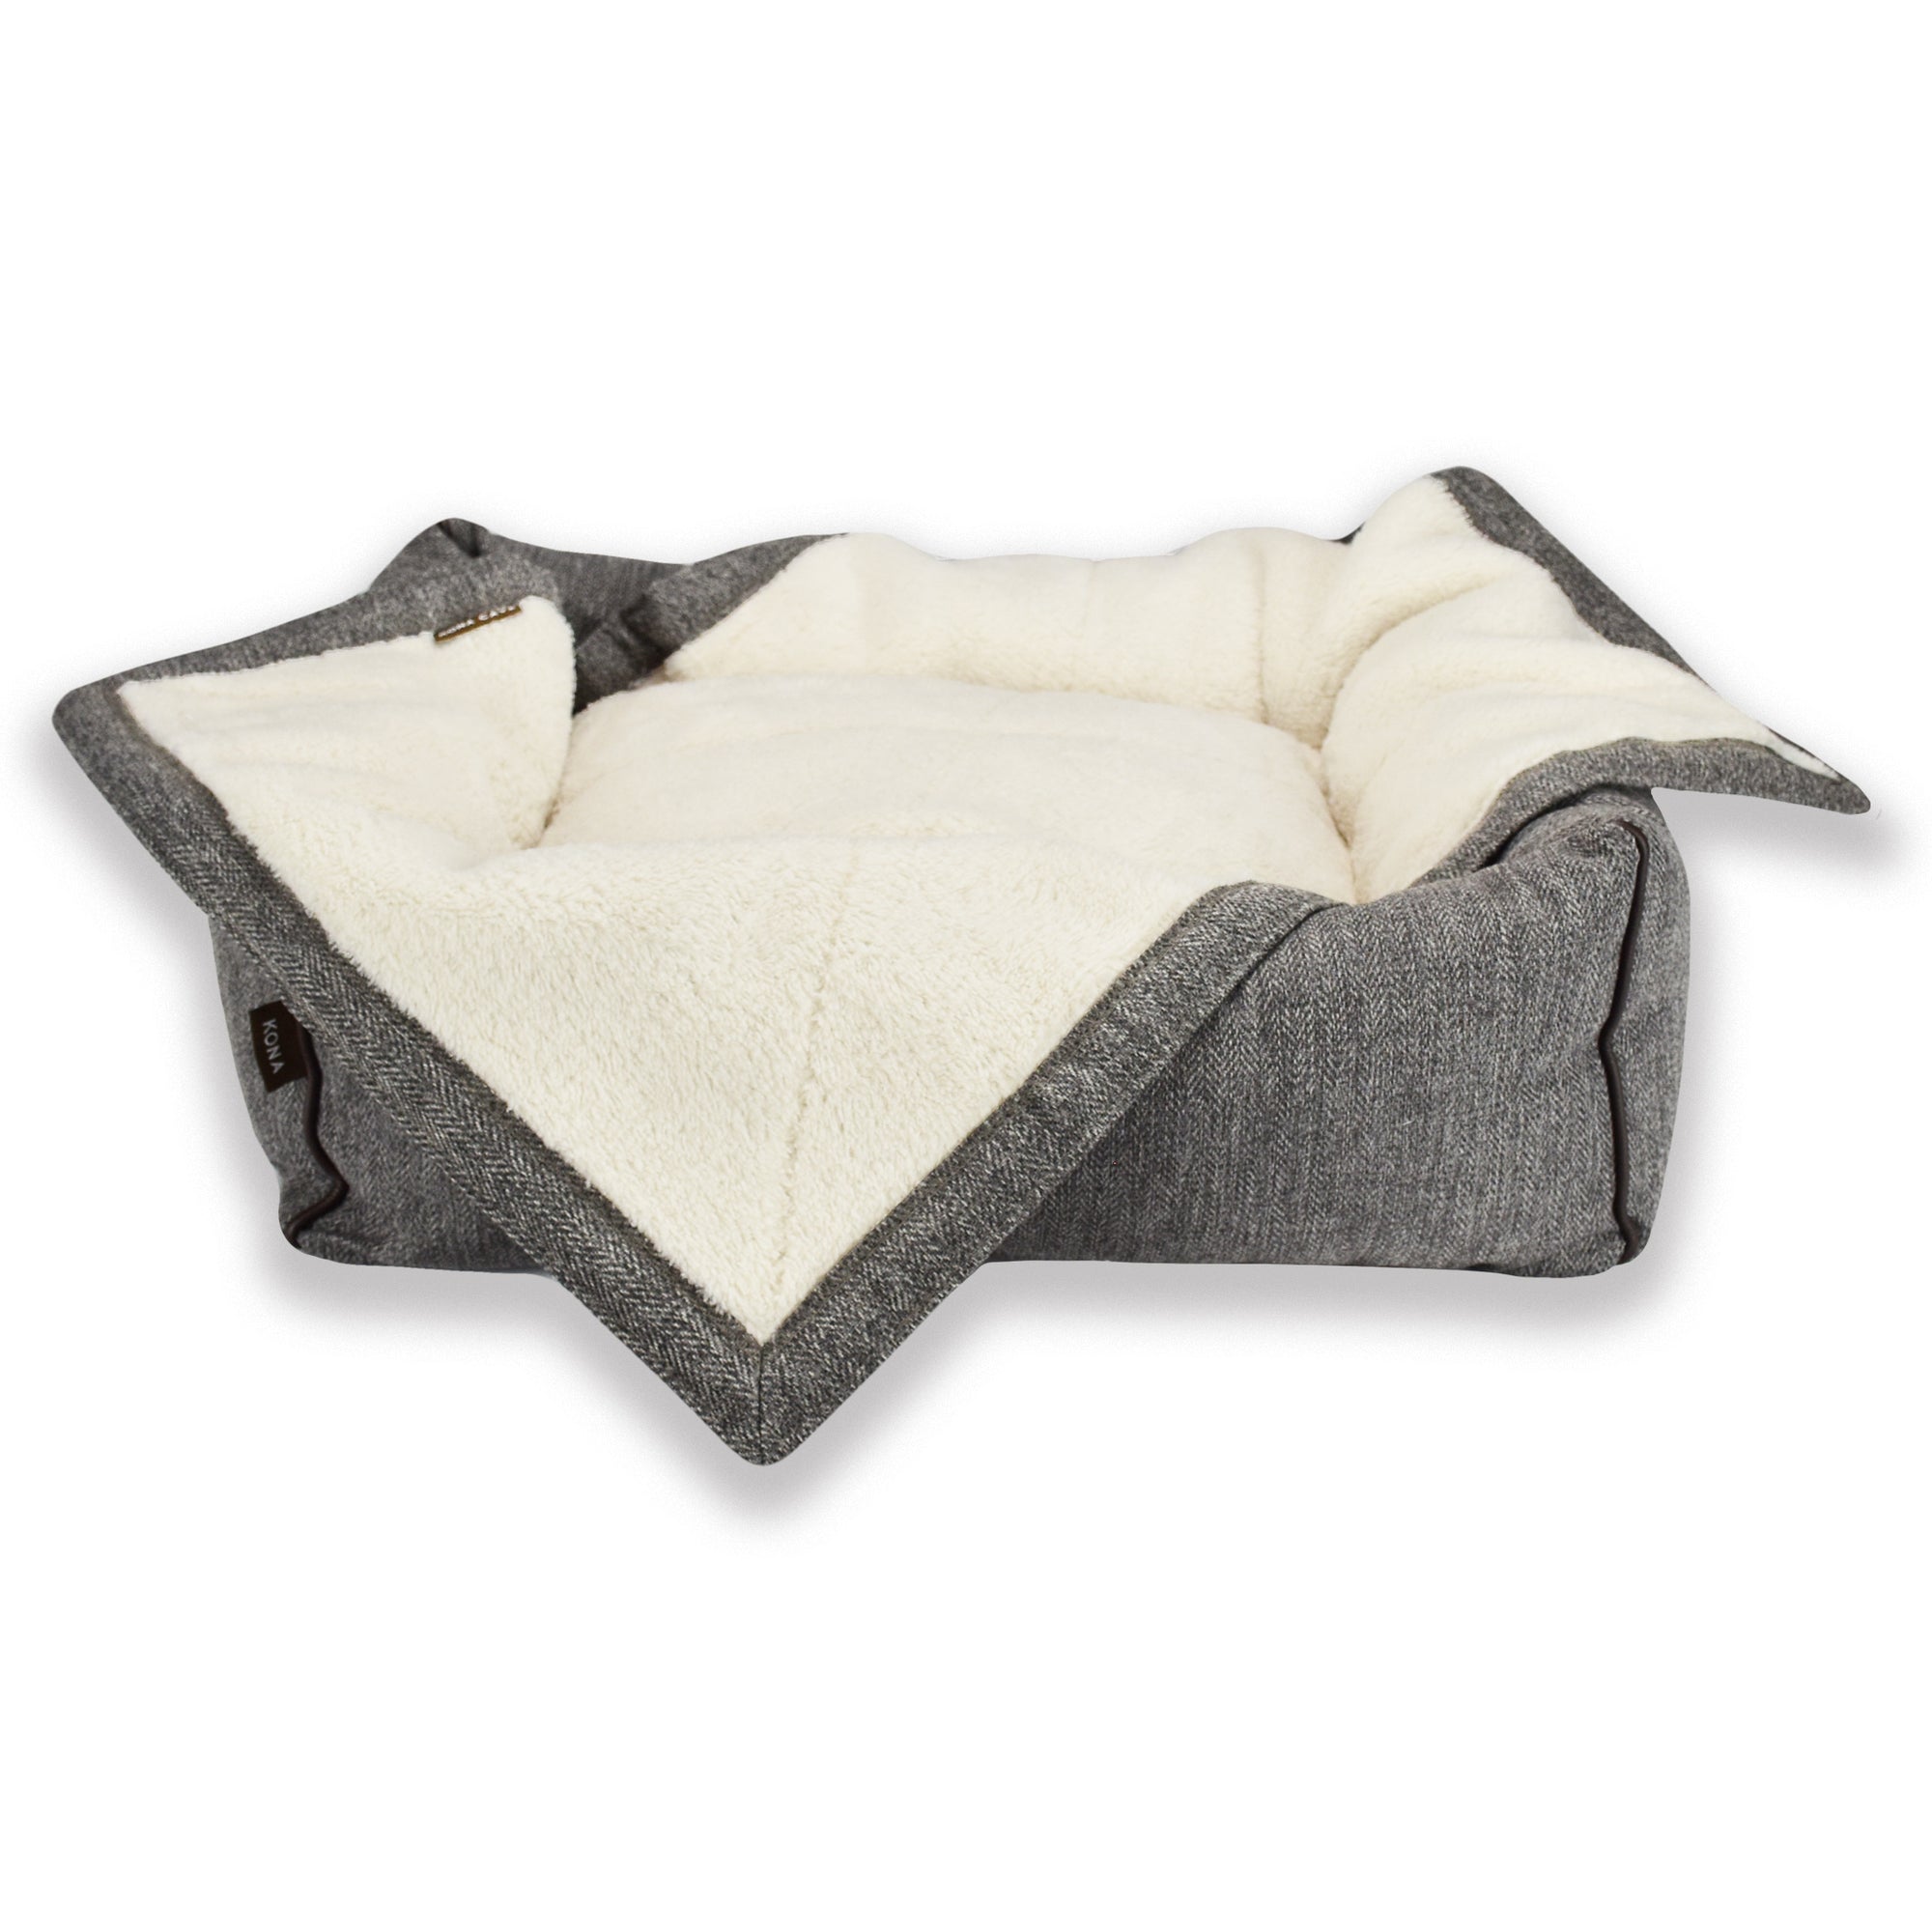 KONA CAVE® Pet Blanket fits perfects to our small Snuggle Cave and Bolster Beds, adding a little layer of extra comfort and a barrier to keep beds clean between washes 